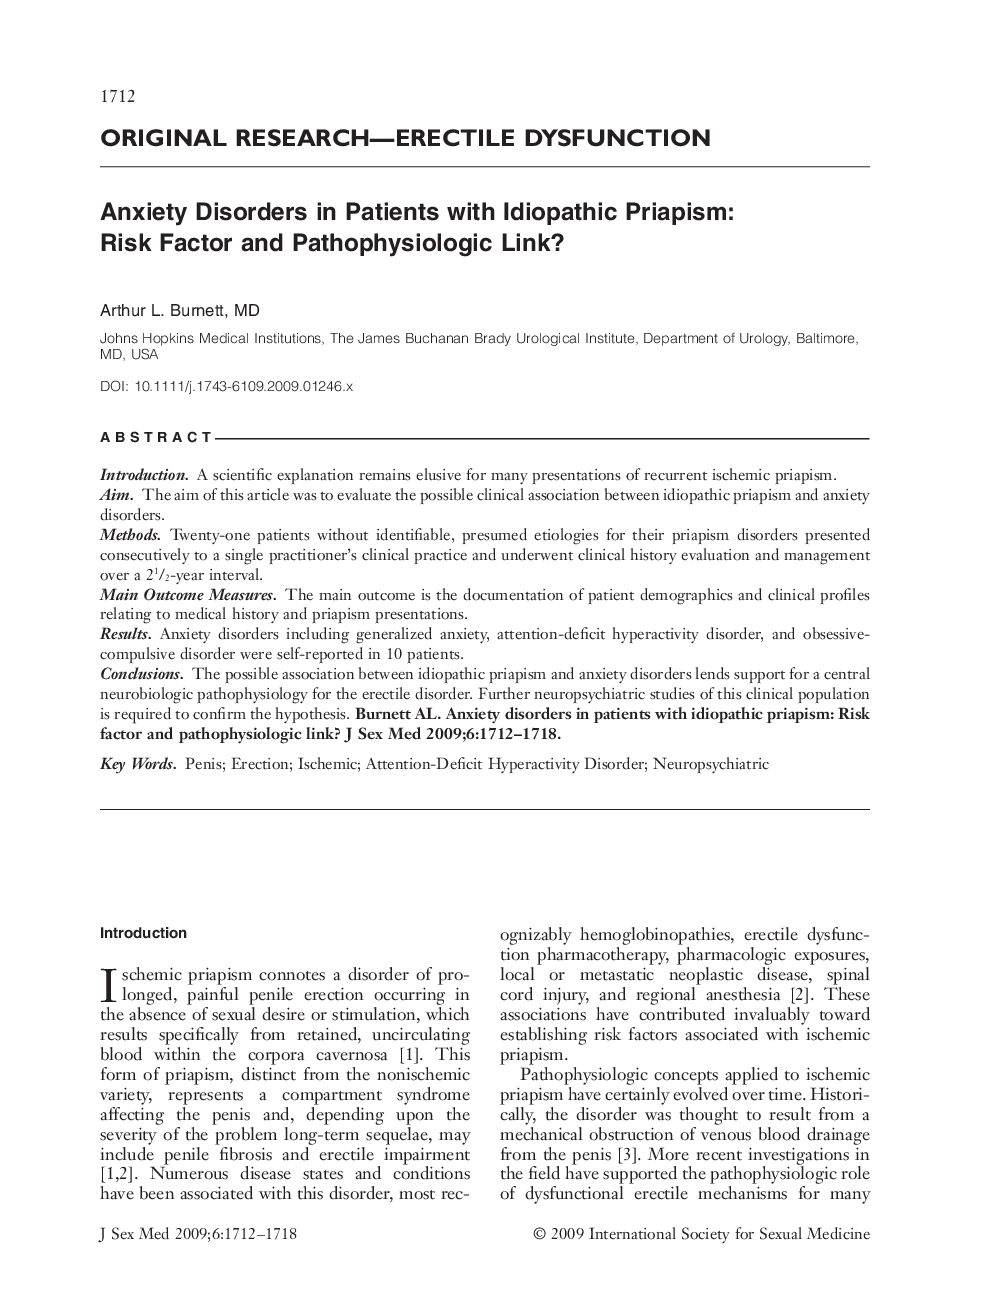 ORIGINAL RESEARCH-ERECTILE DYSFUNCTION: Anxiety Disorders in Patients with Idiopathic Priapism: Risk Factor and Pathophysiologic Link?